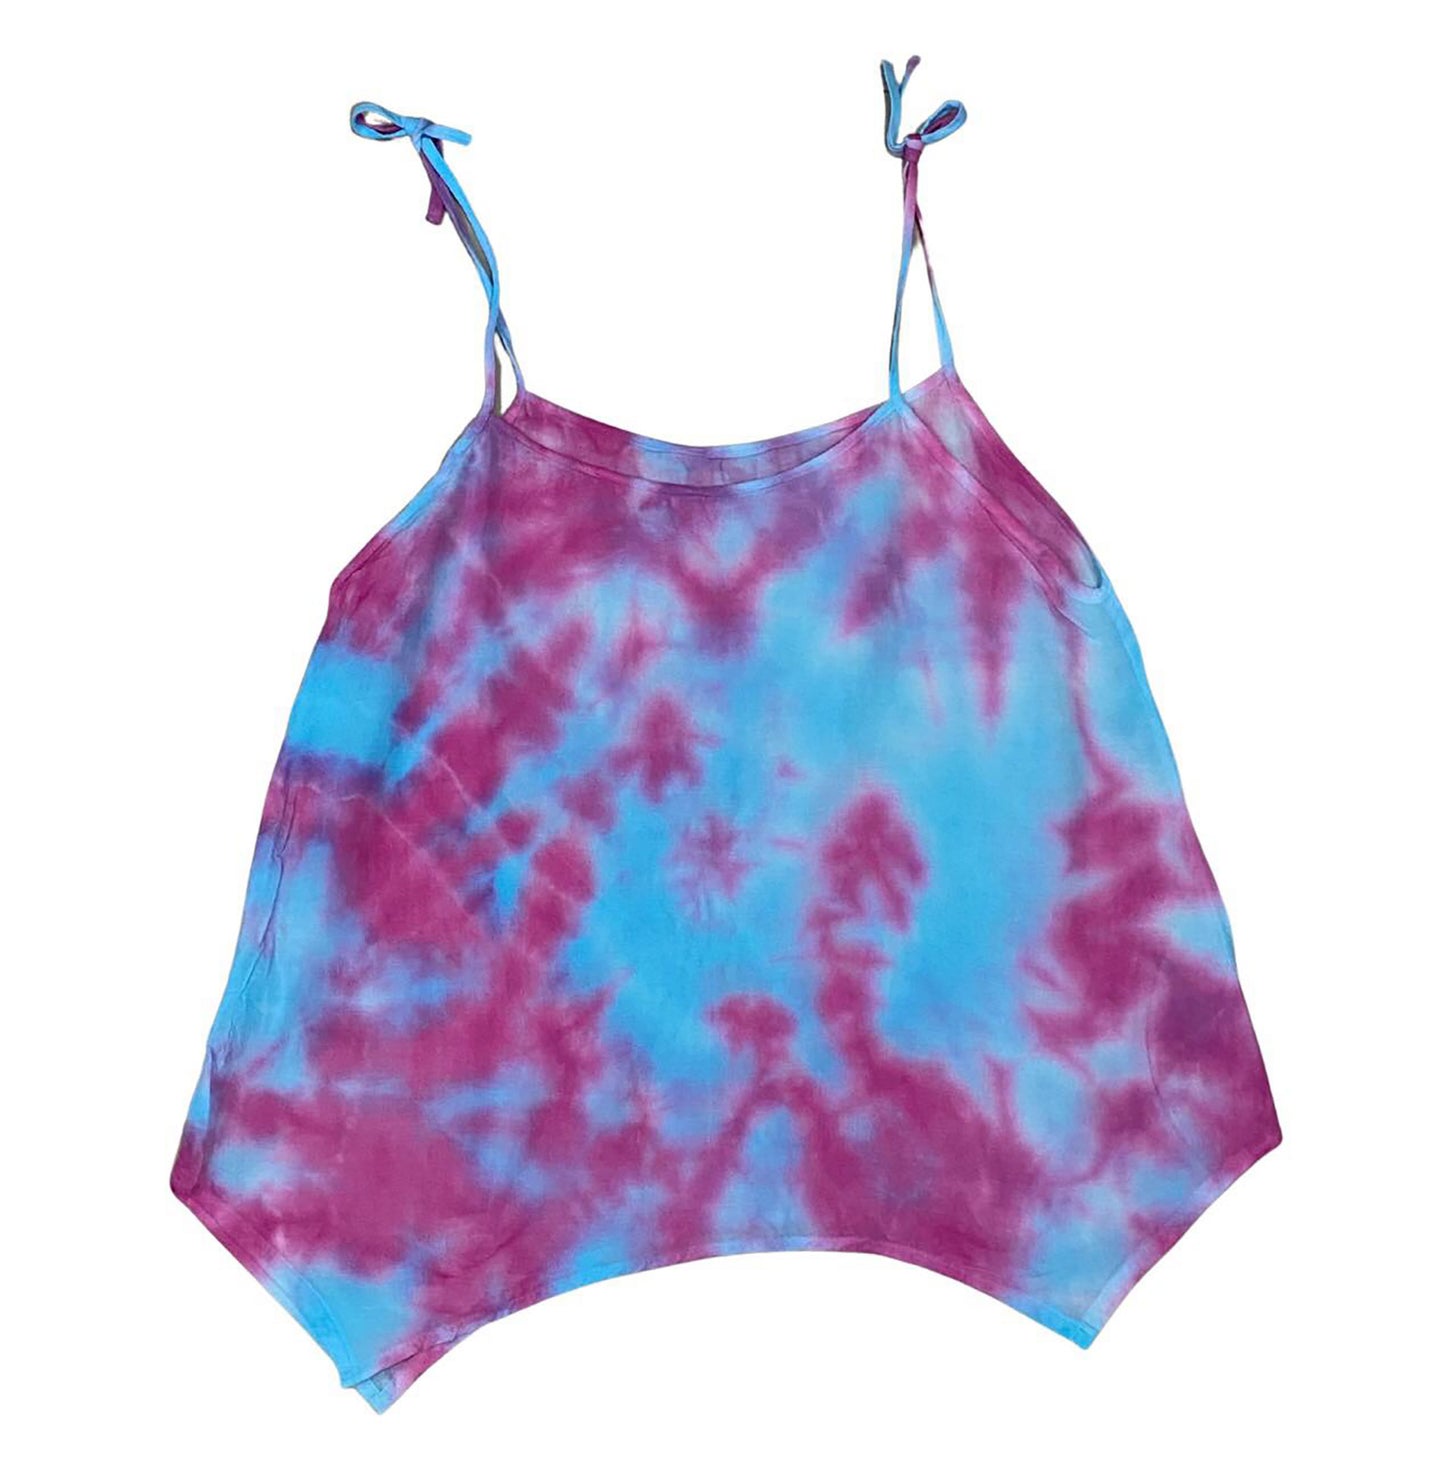 Cami Camisole Teen & Women, One Size Free Size Fit 0 to 8, Handmade Tie Dyed - Pink Blue Marble